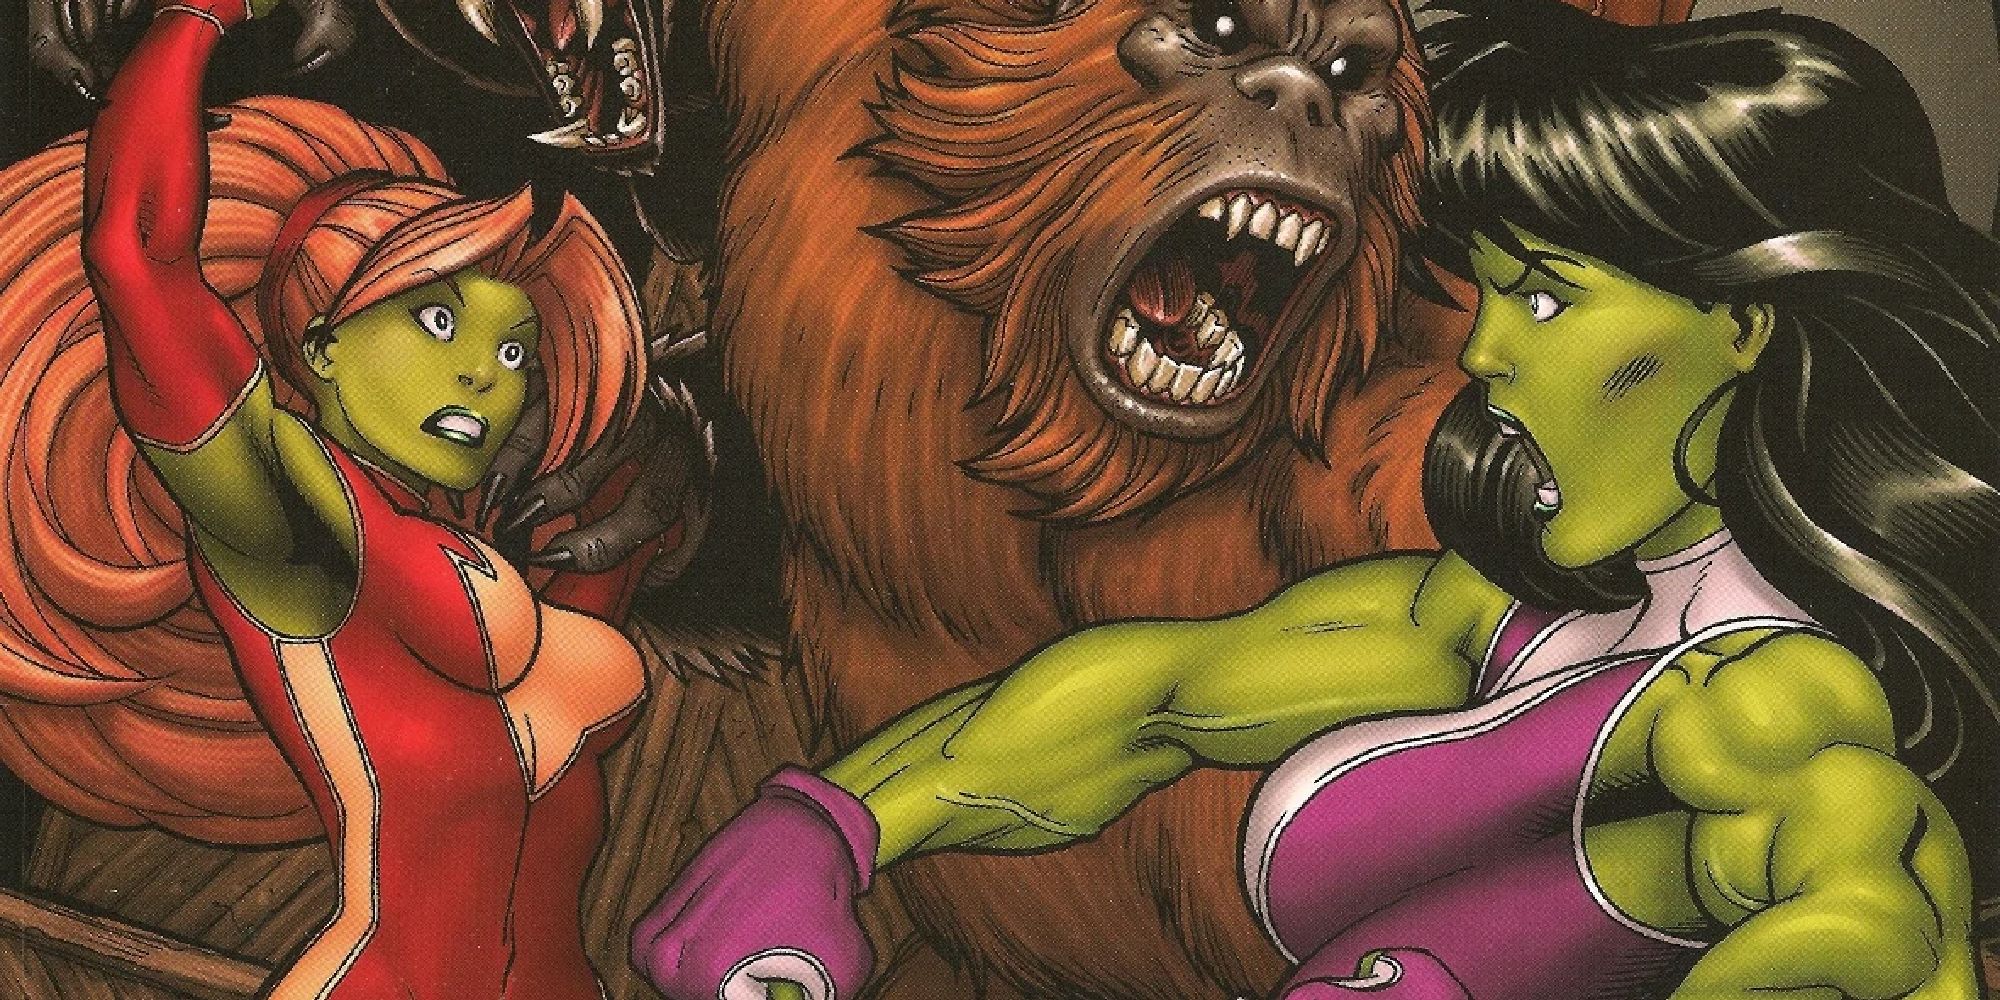 A cover for She-Hulks which finds Lyra and She-Hulk teaming up against a monkey